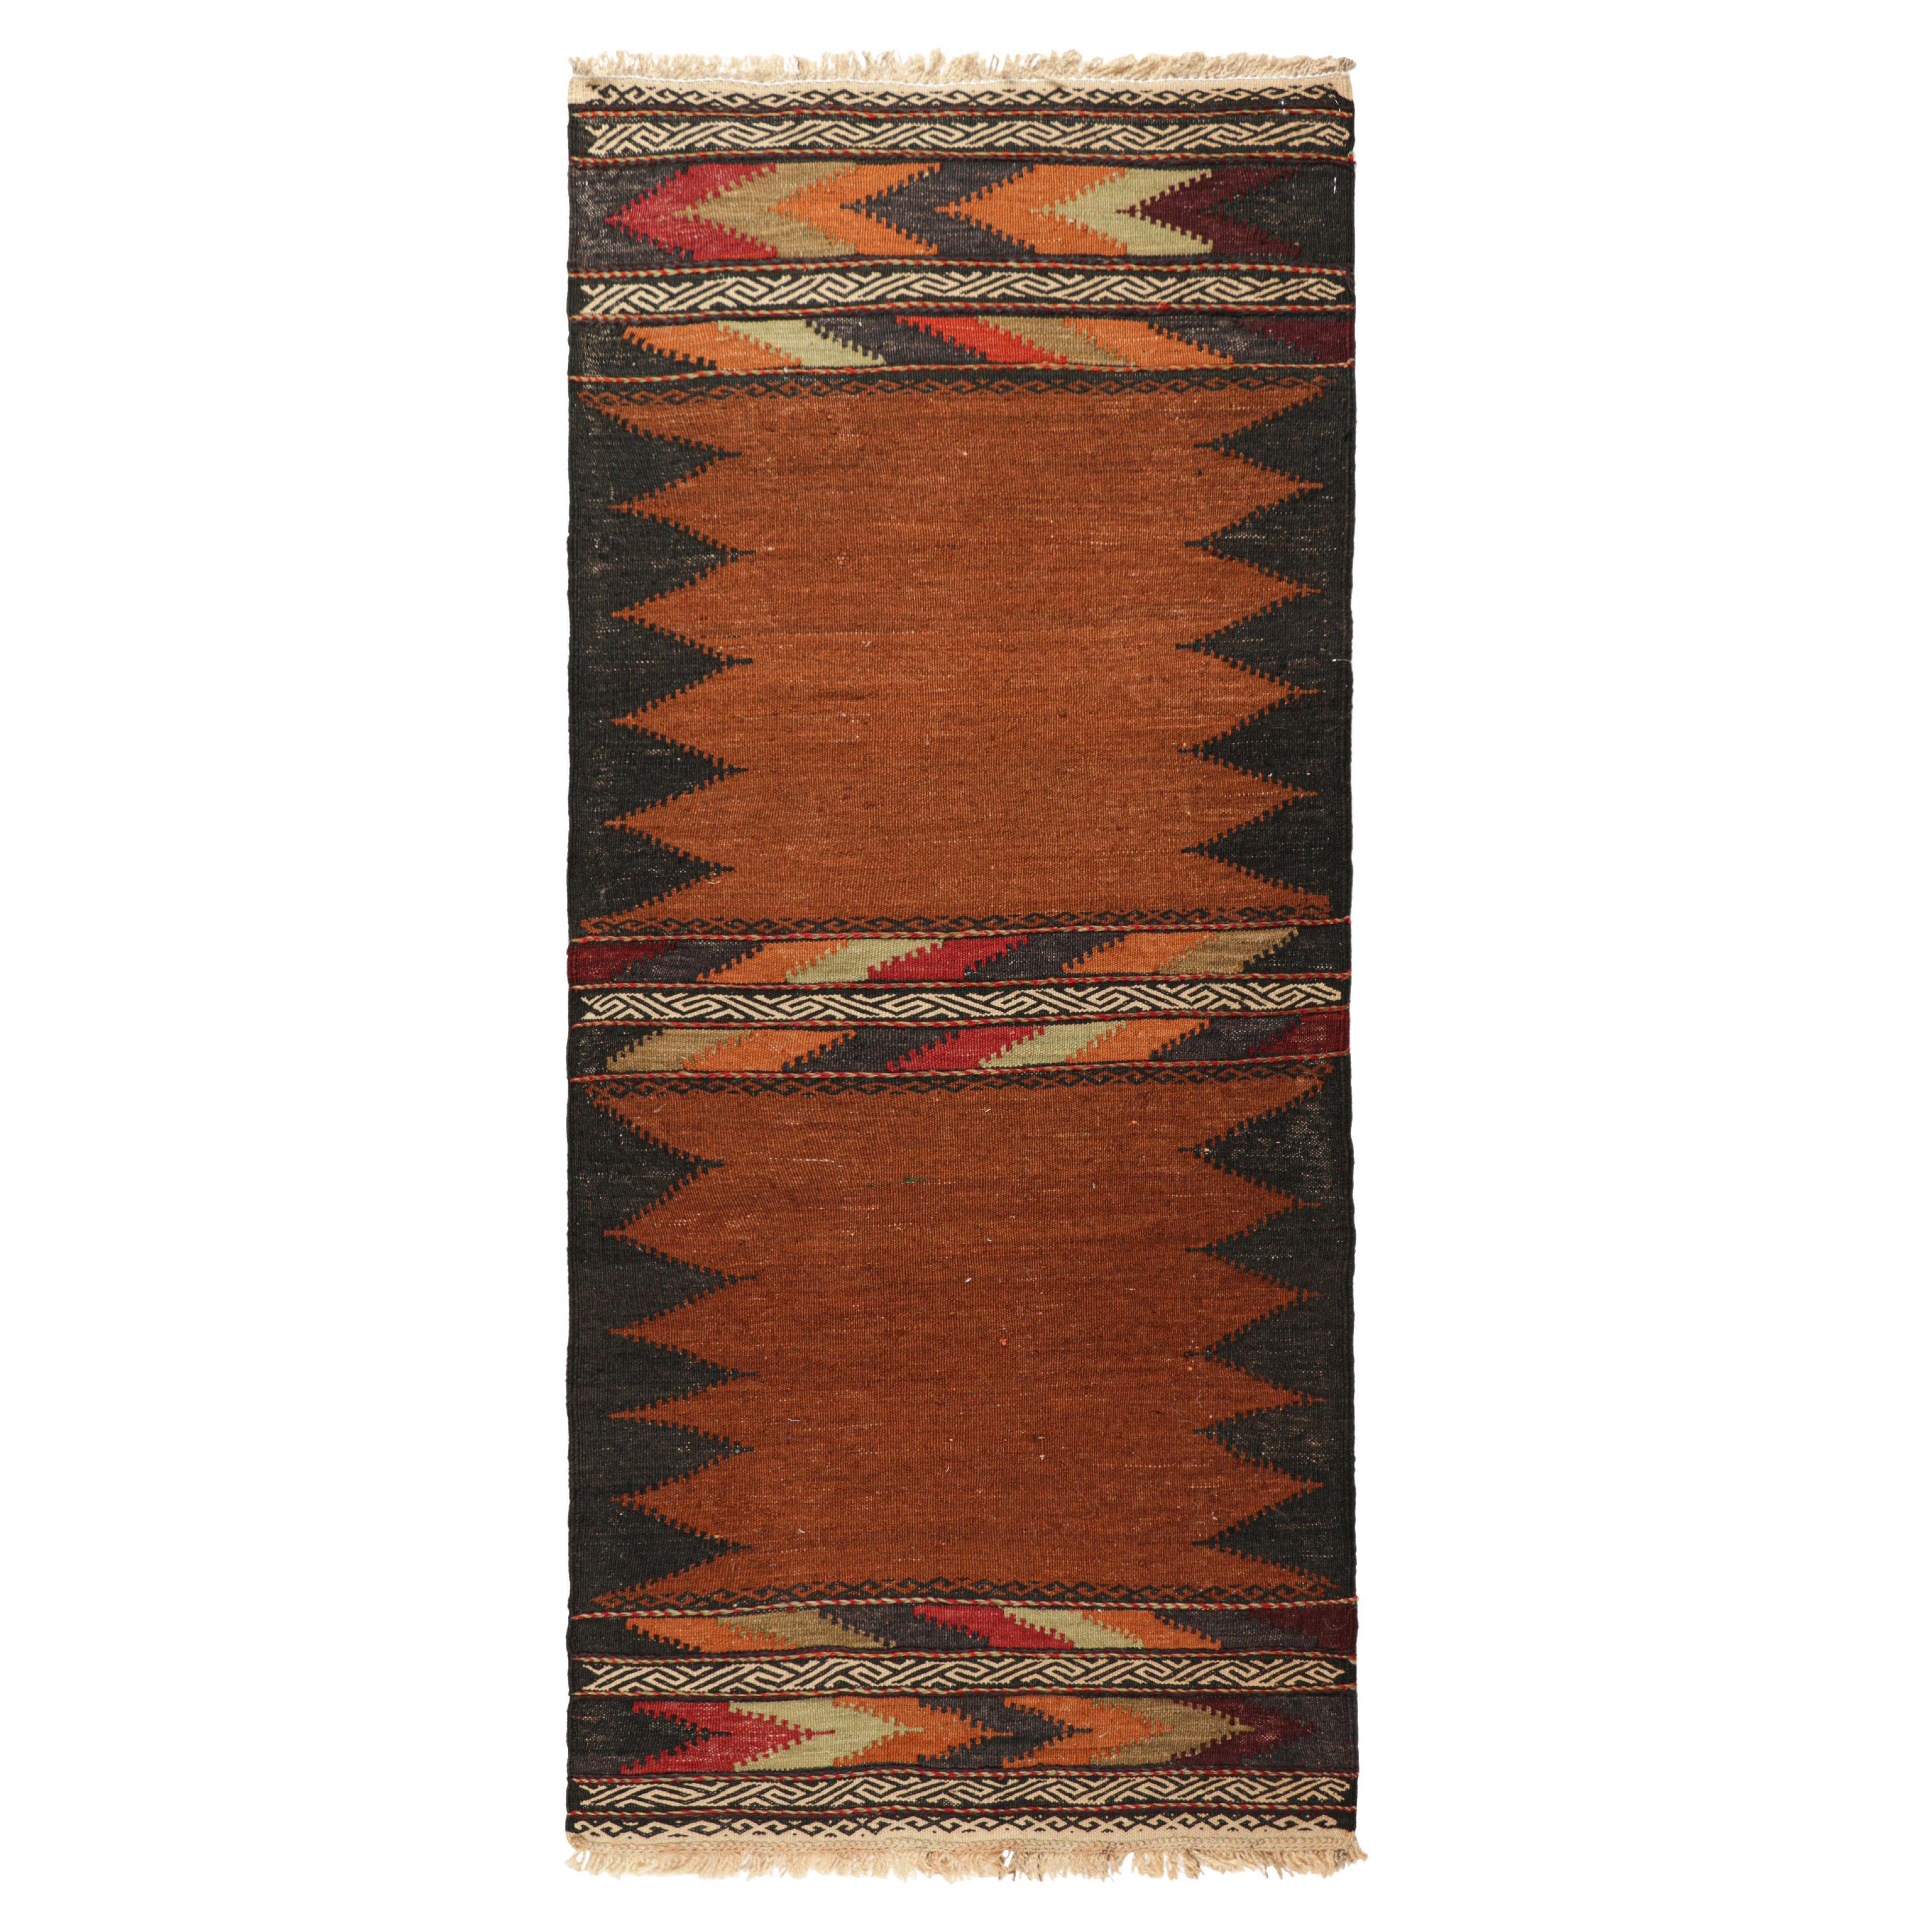 Vintage Afghan Kilim in Rust, with Polychromatic Patterns from Rug & Kilim For Sale